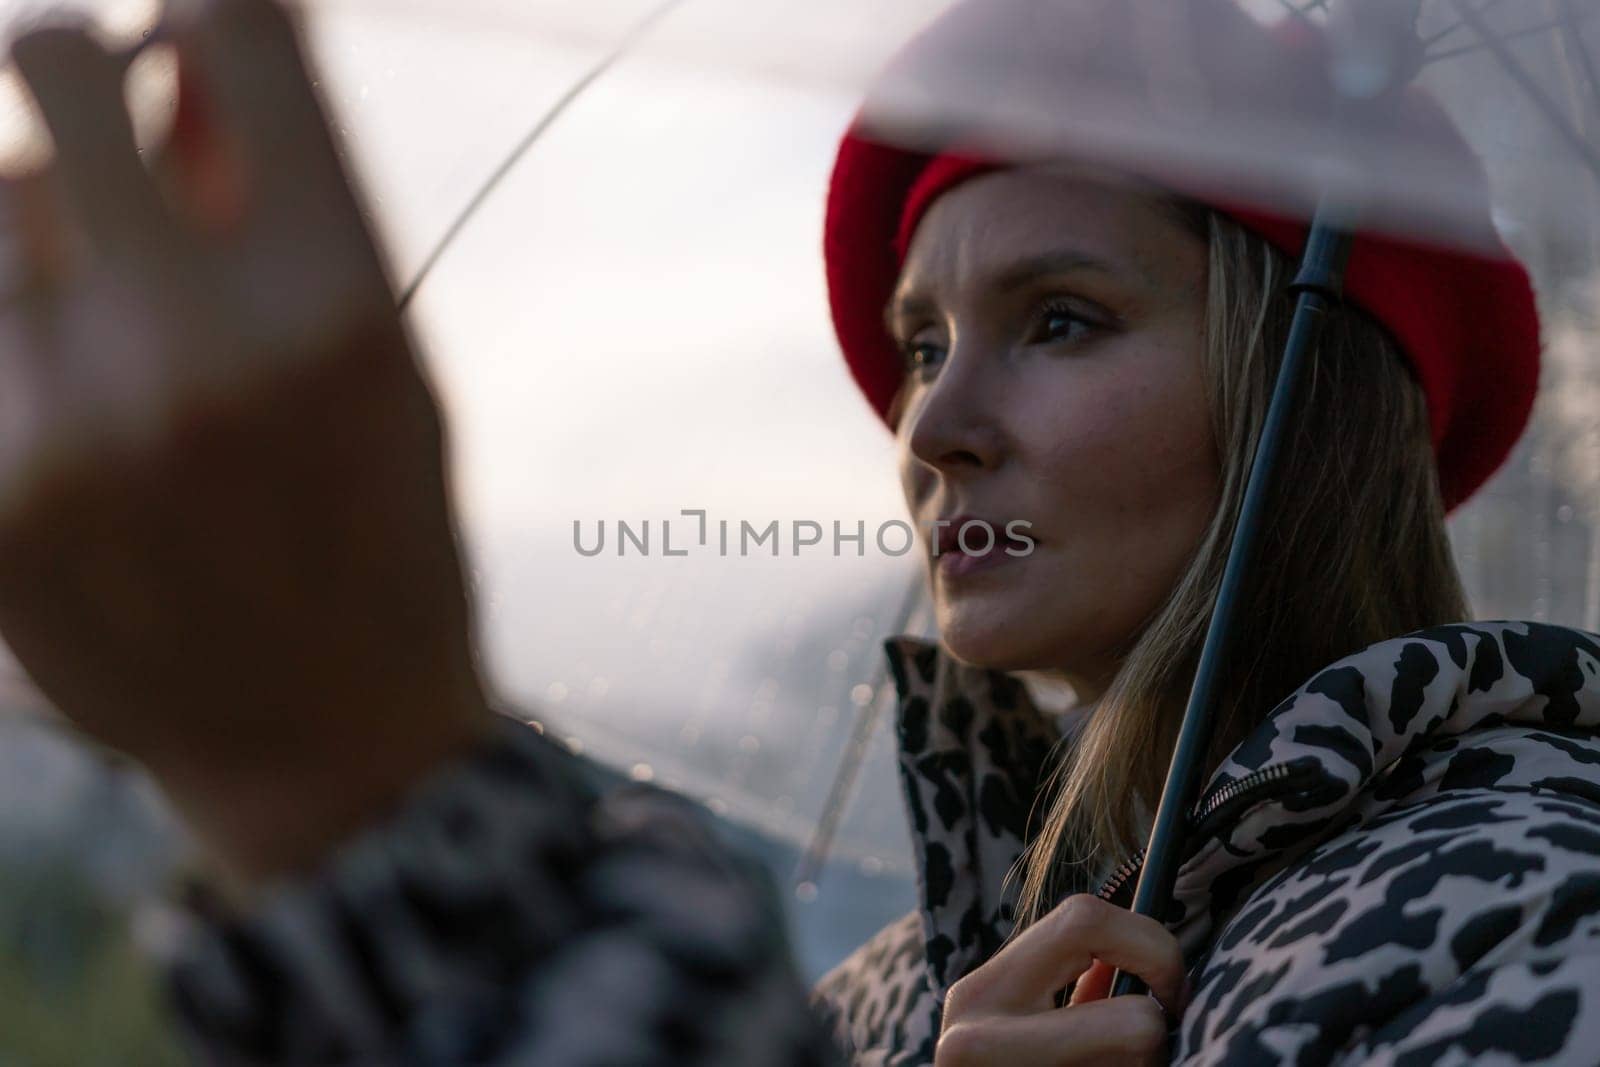 A woman wearing a red hat and a leopard print coat is holding a clear umbrella. The umbrella is open, and the woman is looking up at the sky. The scene has a calm and peaceful mood. by Matiunina